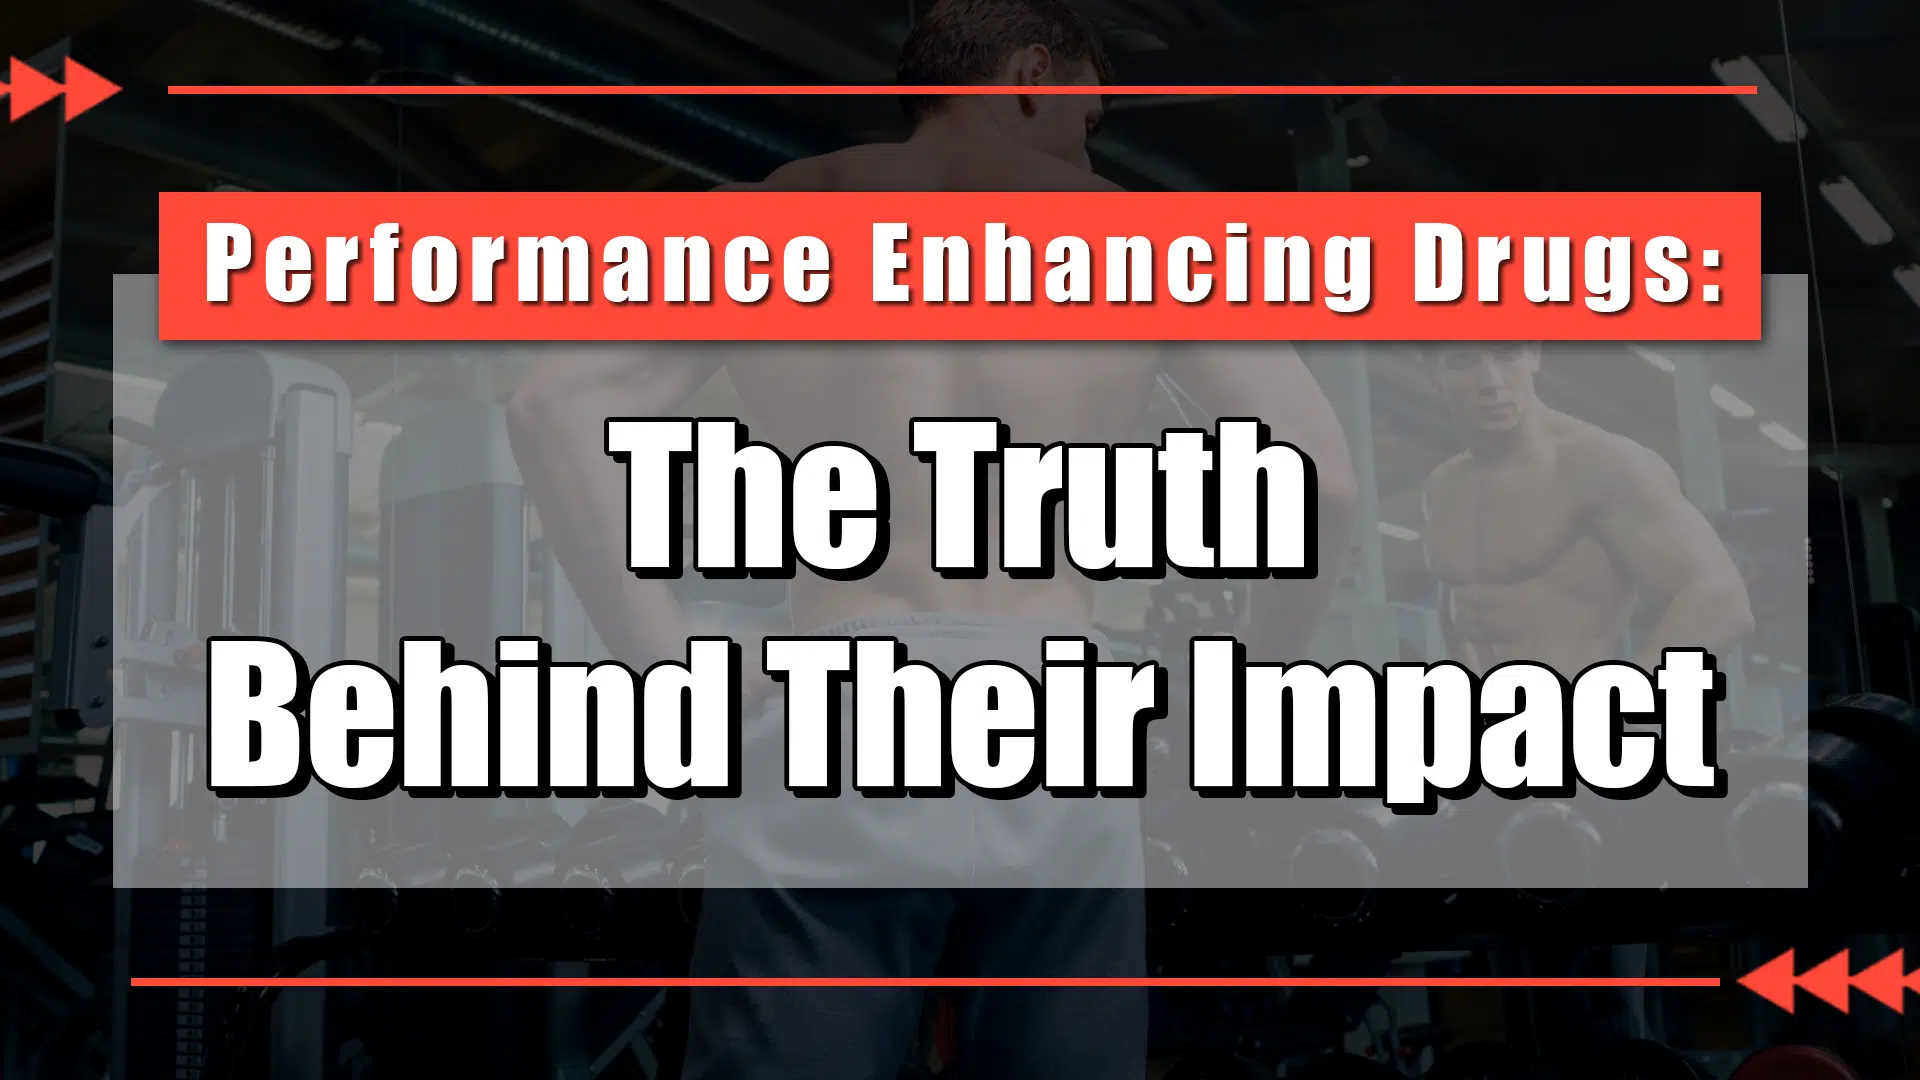 Performance Enhancing Drugs: The Truth Behind Their Impact